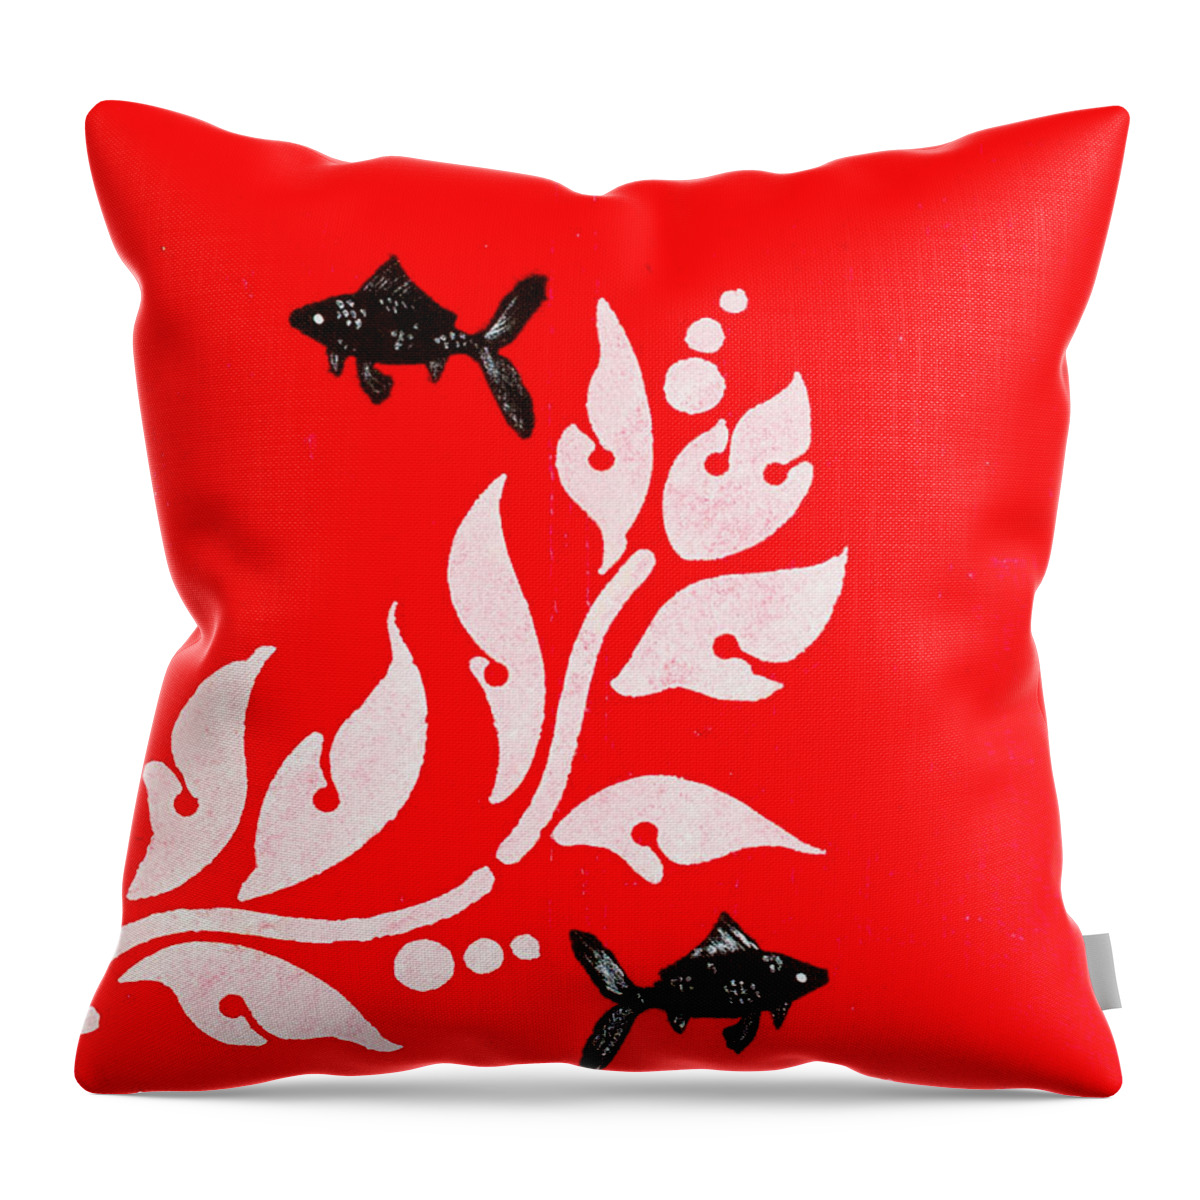  Throw Pillow featuring the painting Black fish left by Stefanie Forck